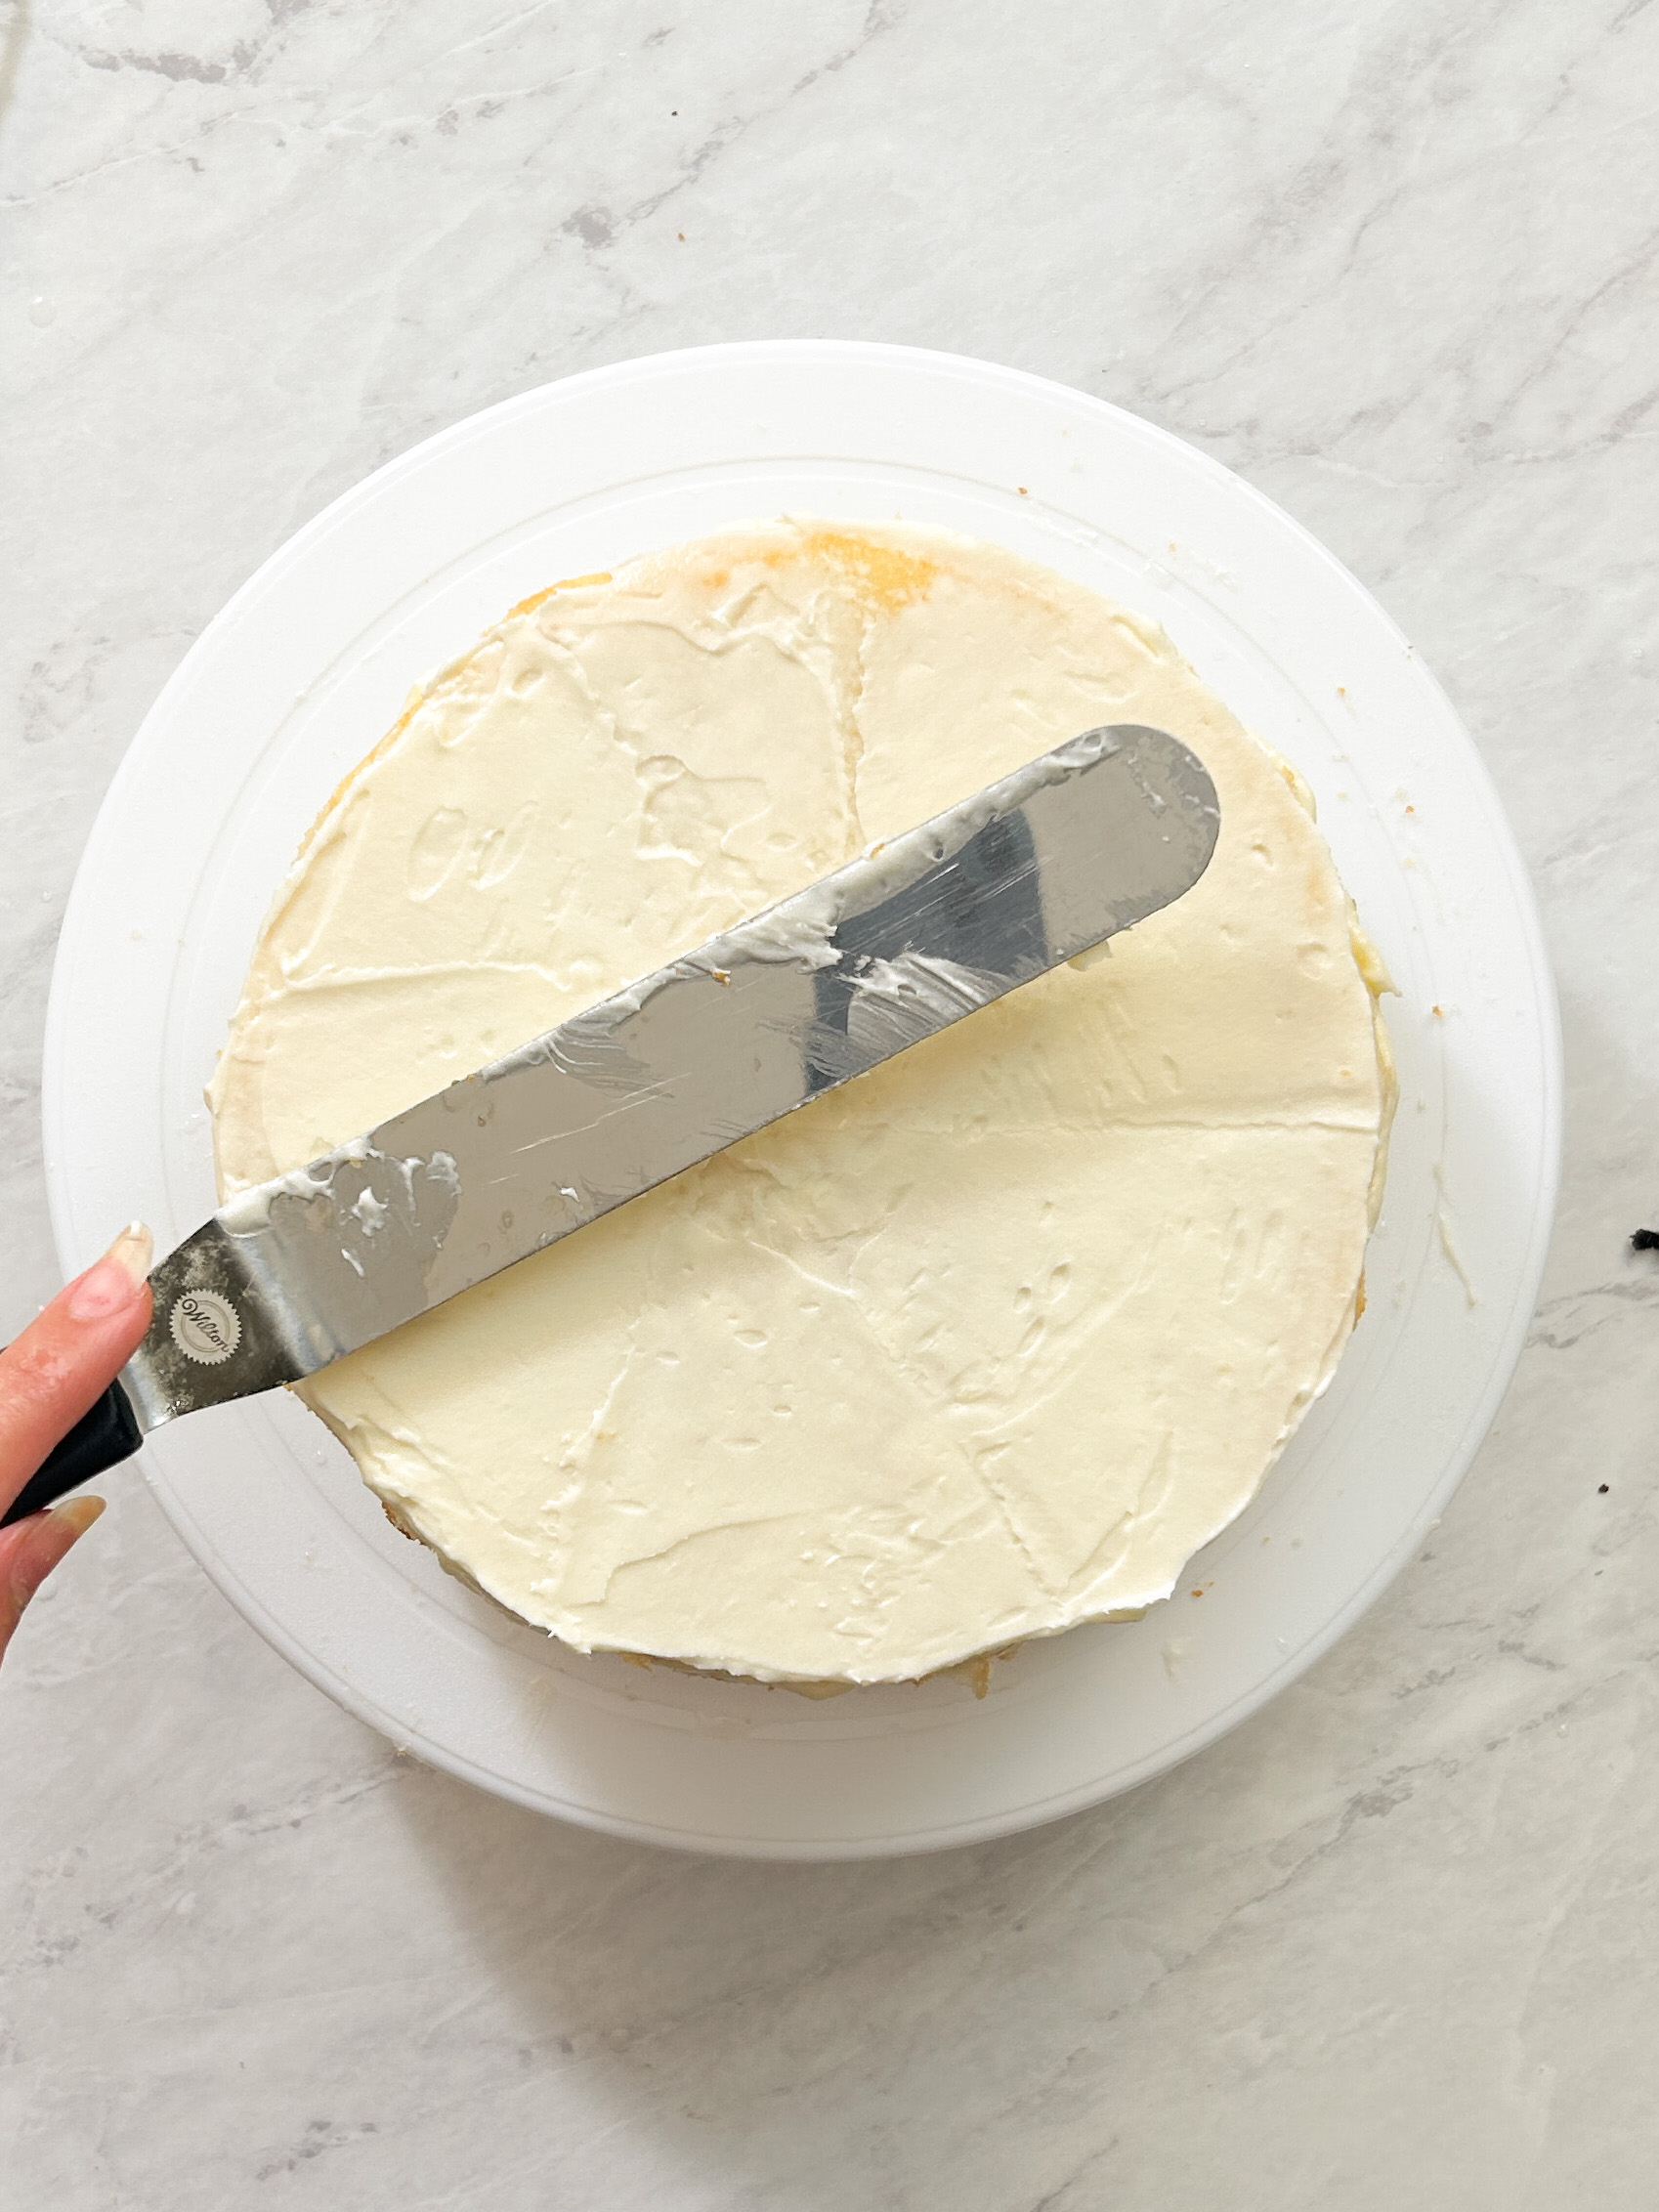 cream cheese frosting being spread on a layer of cake during assembly